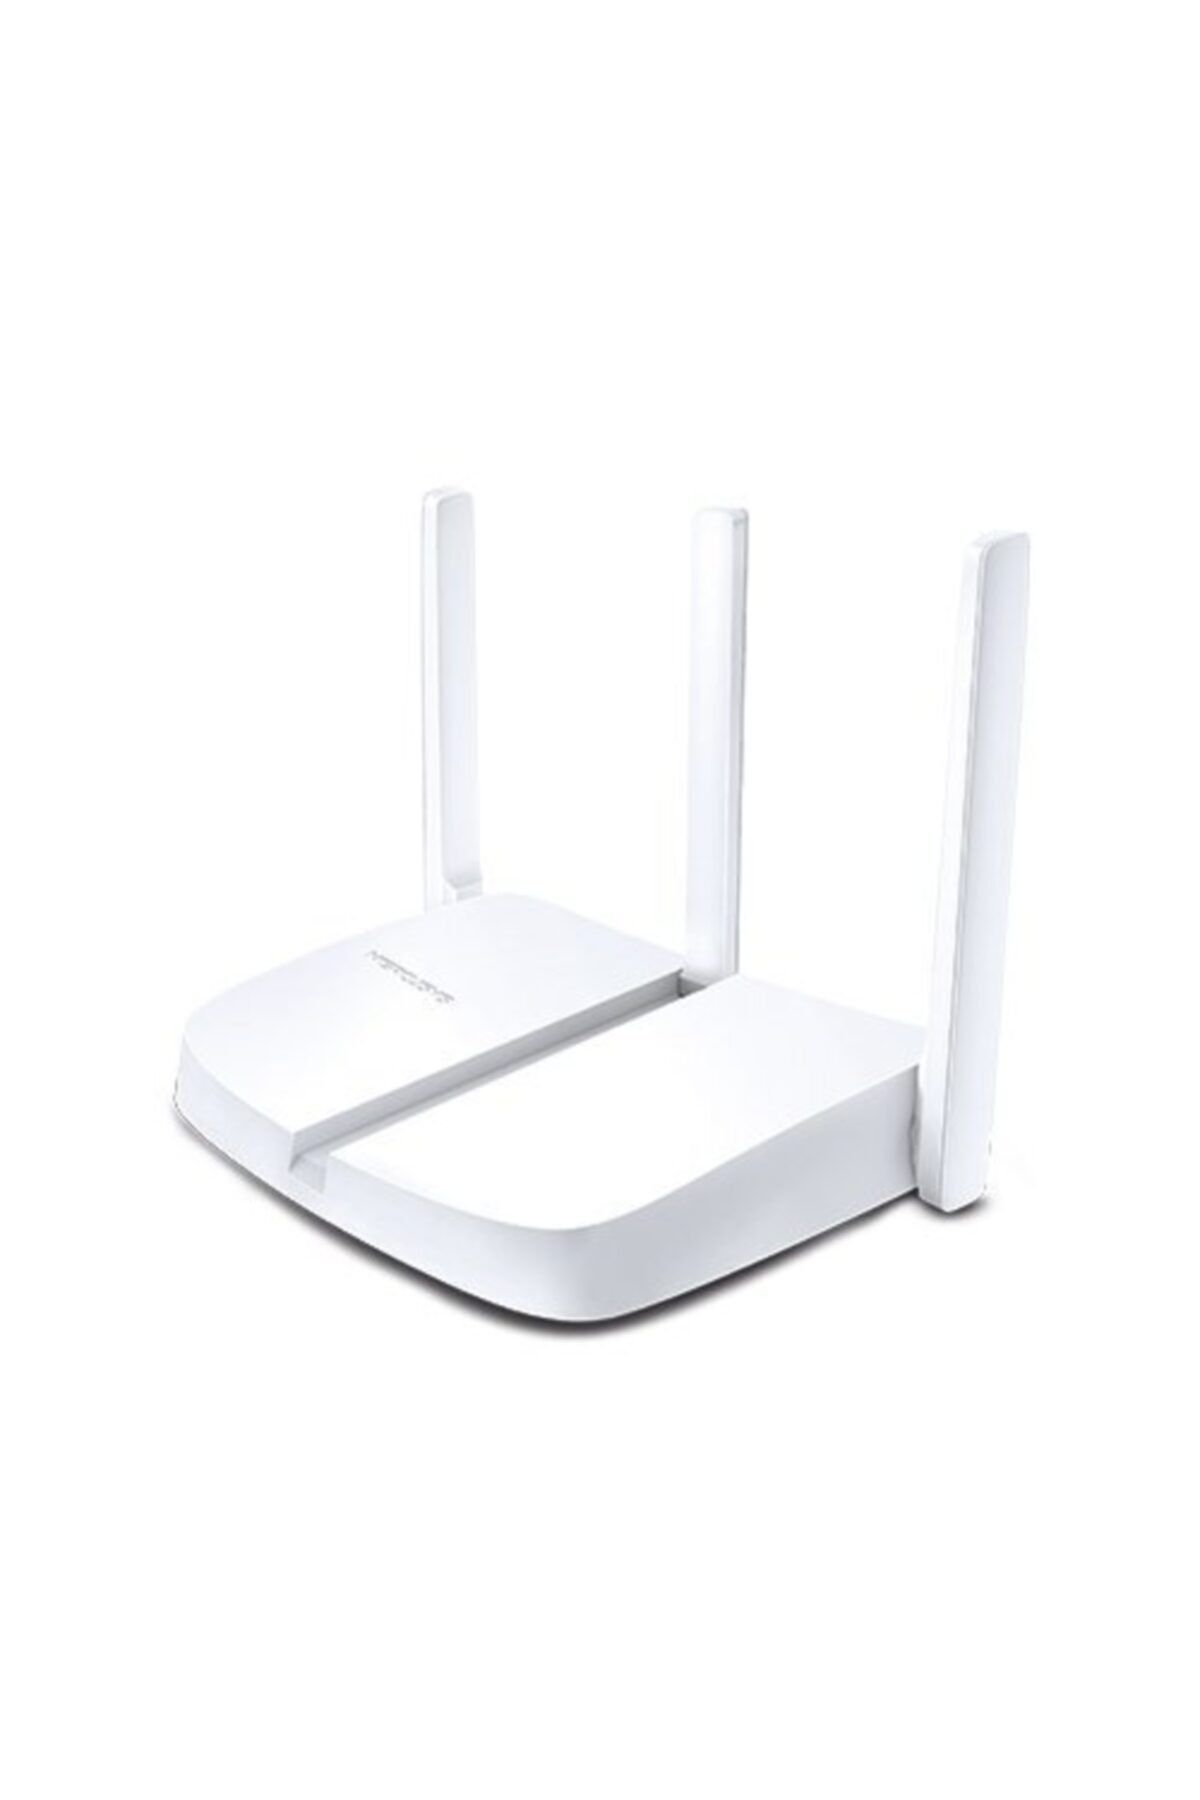 Mercusys MW305R 300 Mbps Acess Point Router